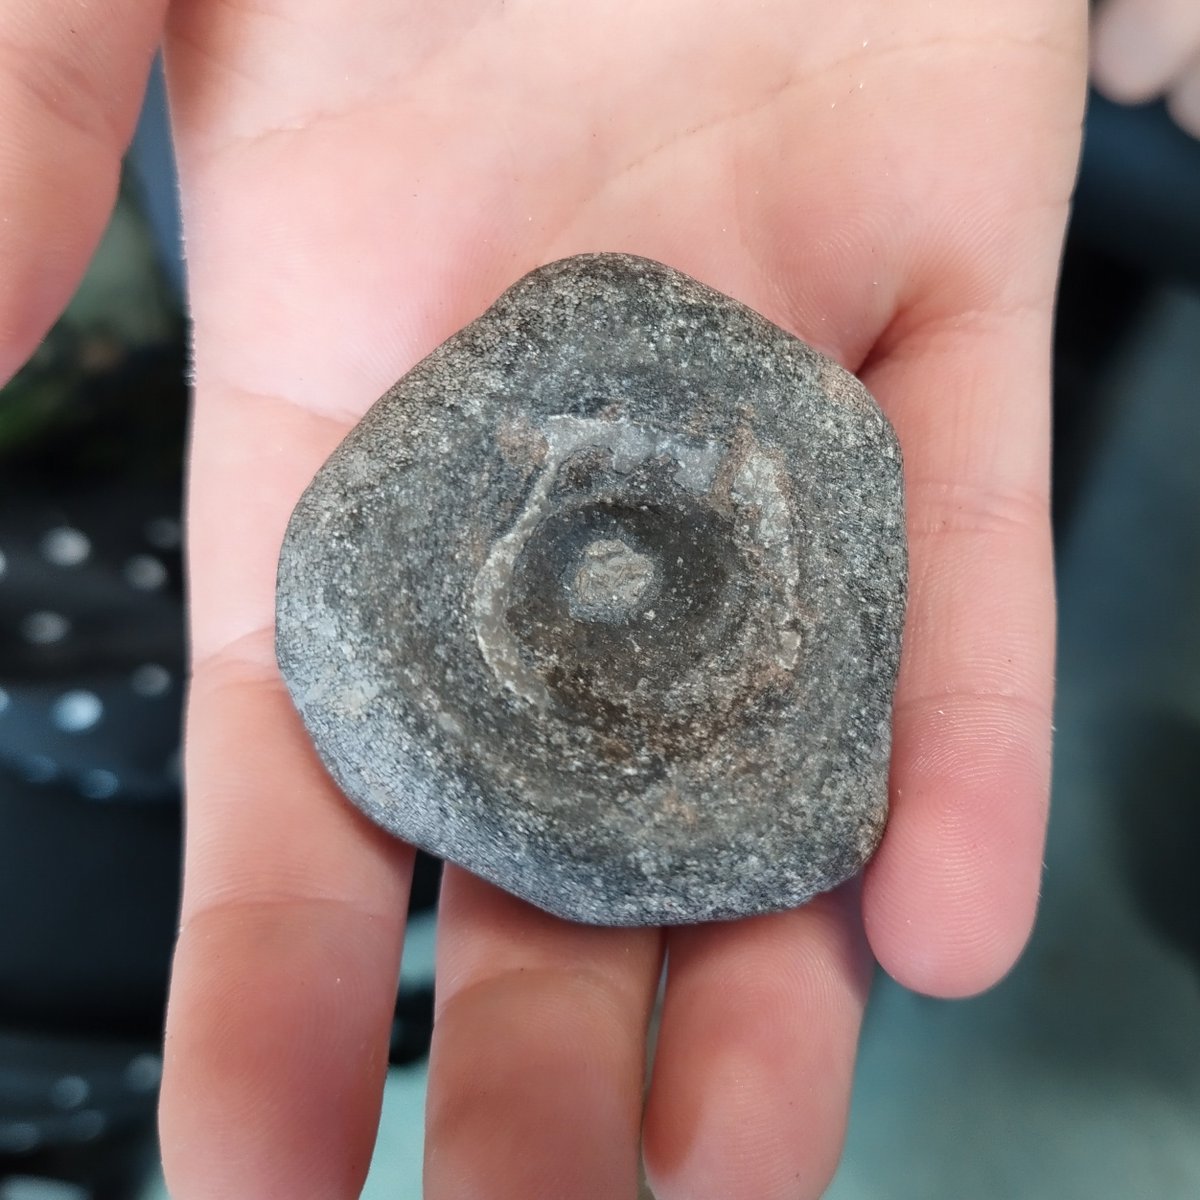 Our work experience Tegan, who's come all the way from Northamptonshire, found her first ever ichthyosaur vertebra while helping on a school fossil hunting walk on Tuesday. What a fantastic find! #FossilFriday